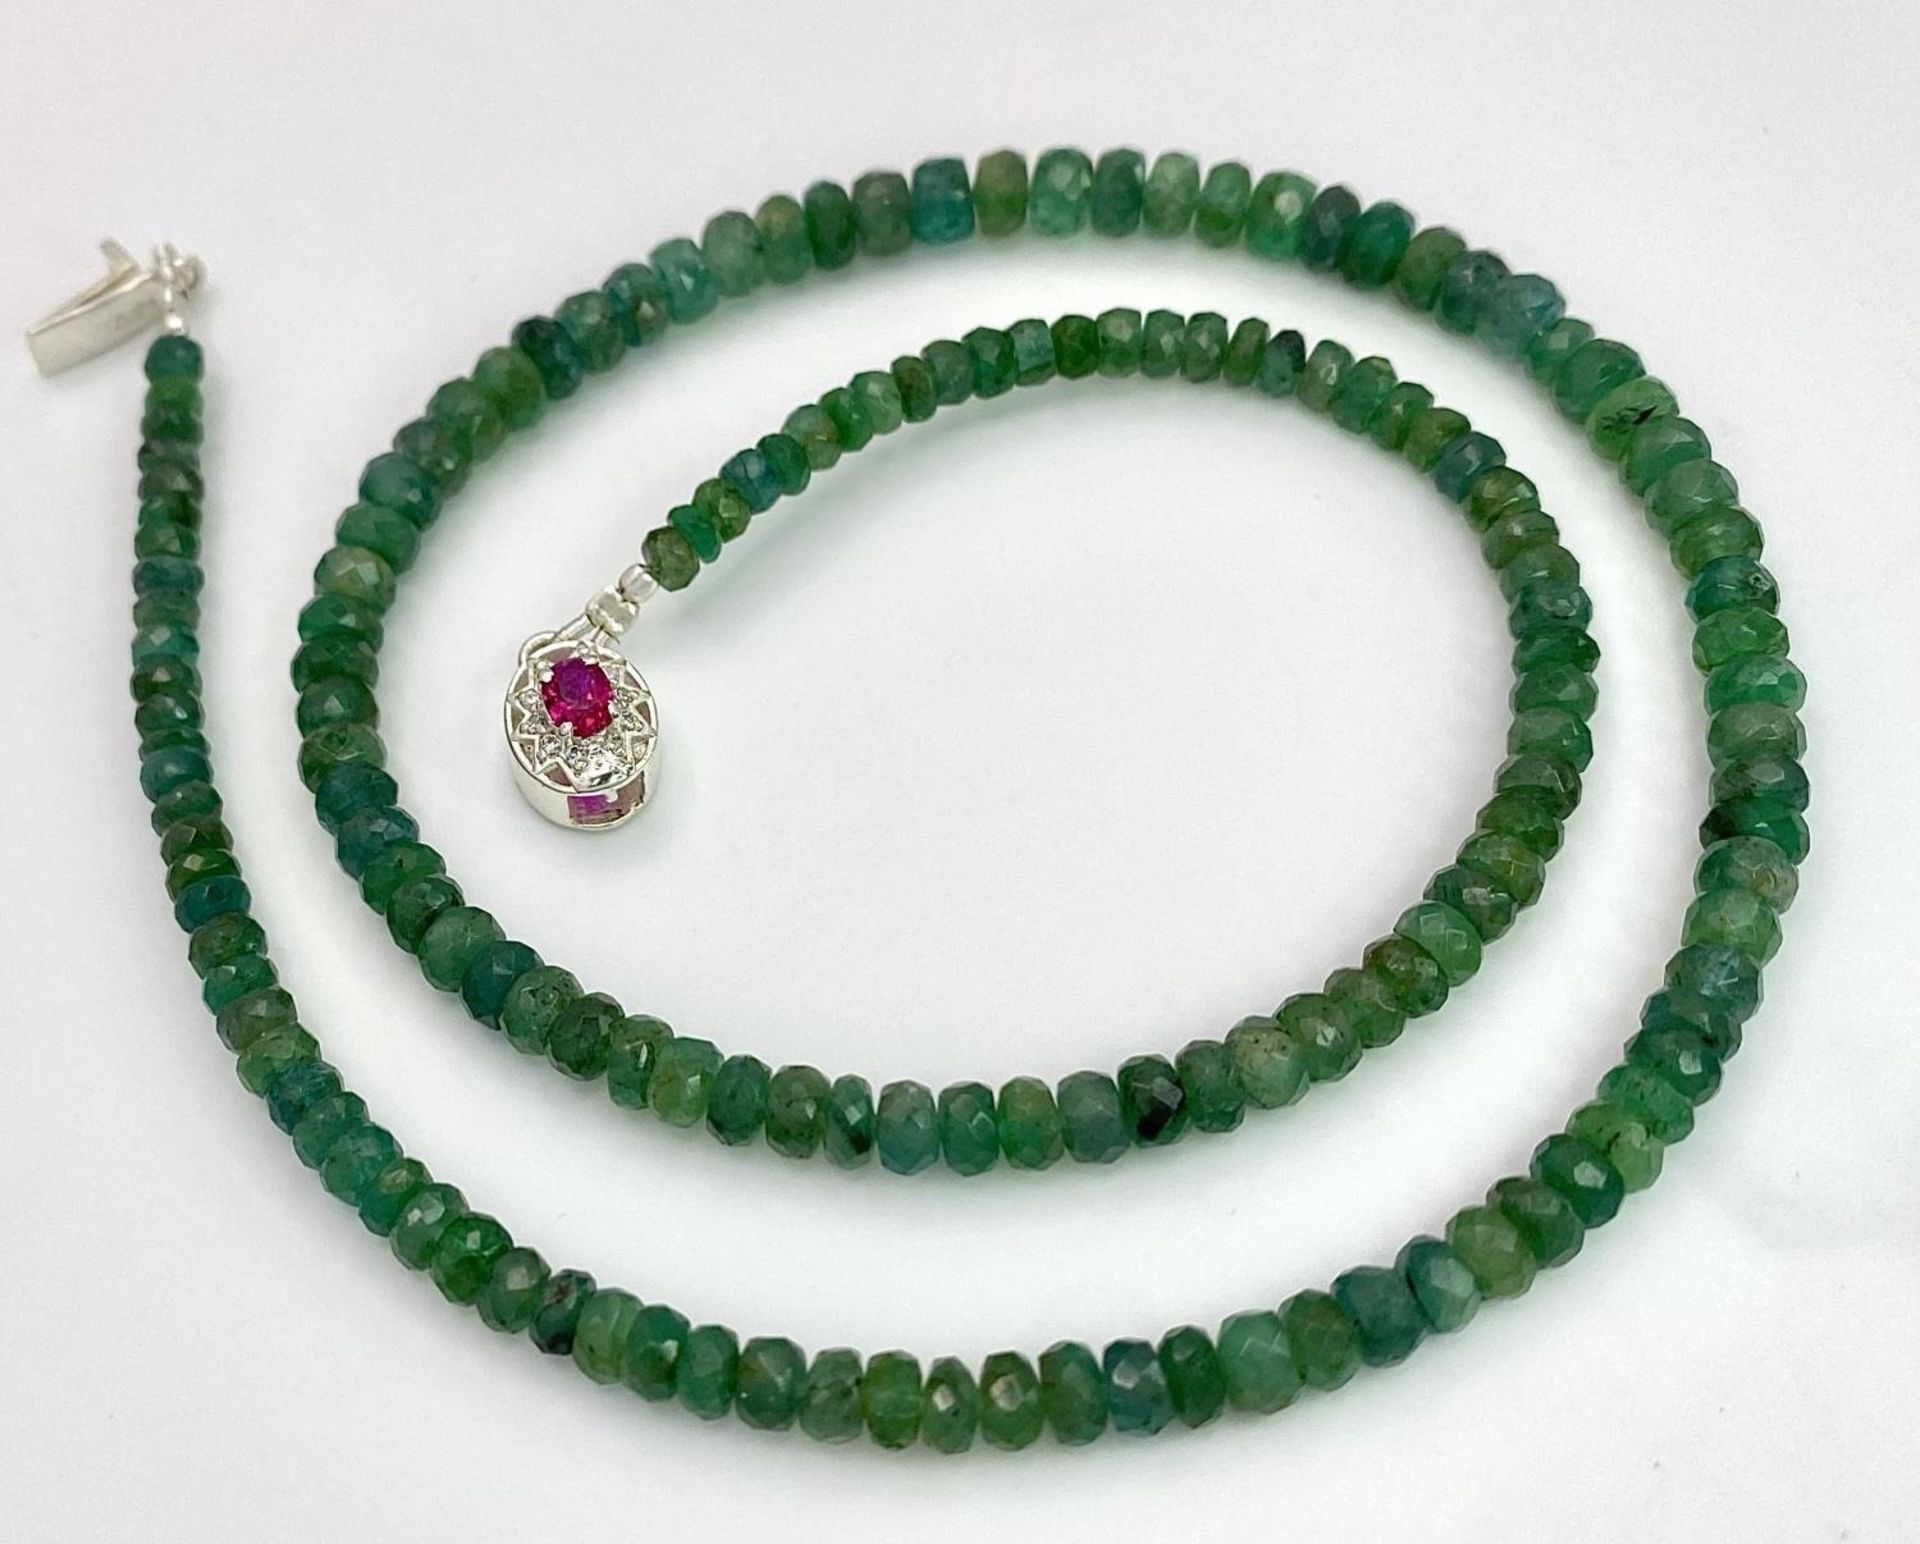 A 90ctw Single Strand Emerald Rondelle Necklace with a Ruby and 925 Silver Clasp. 42cm length.